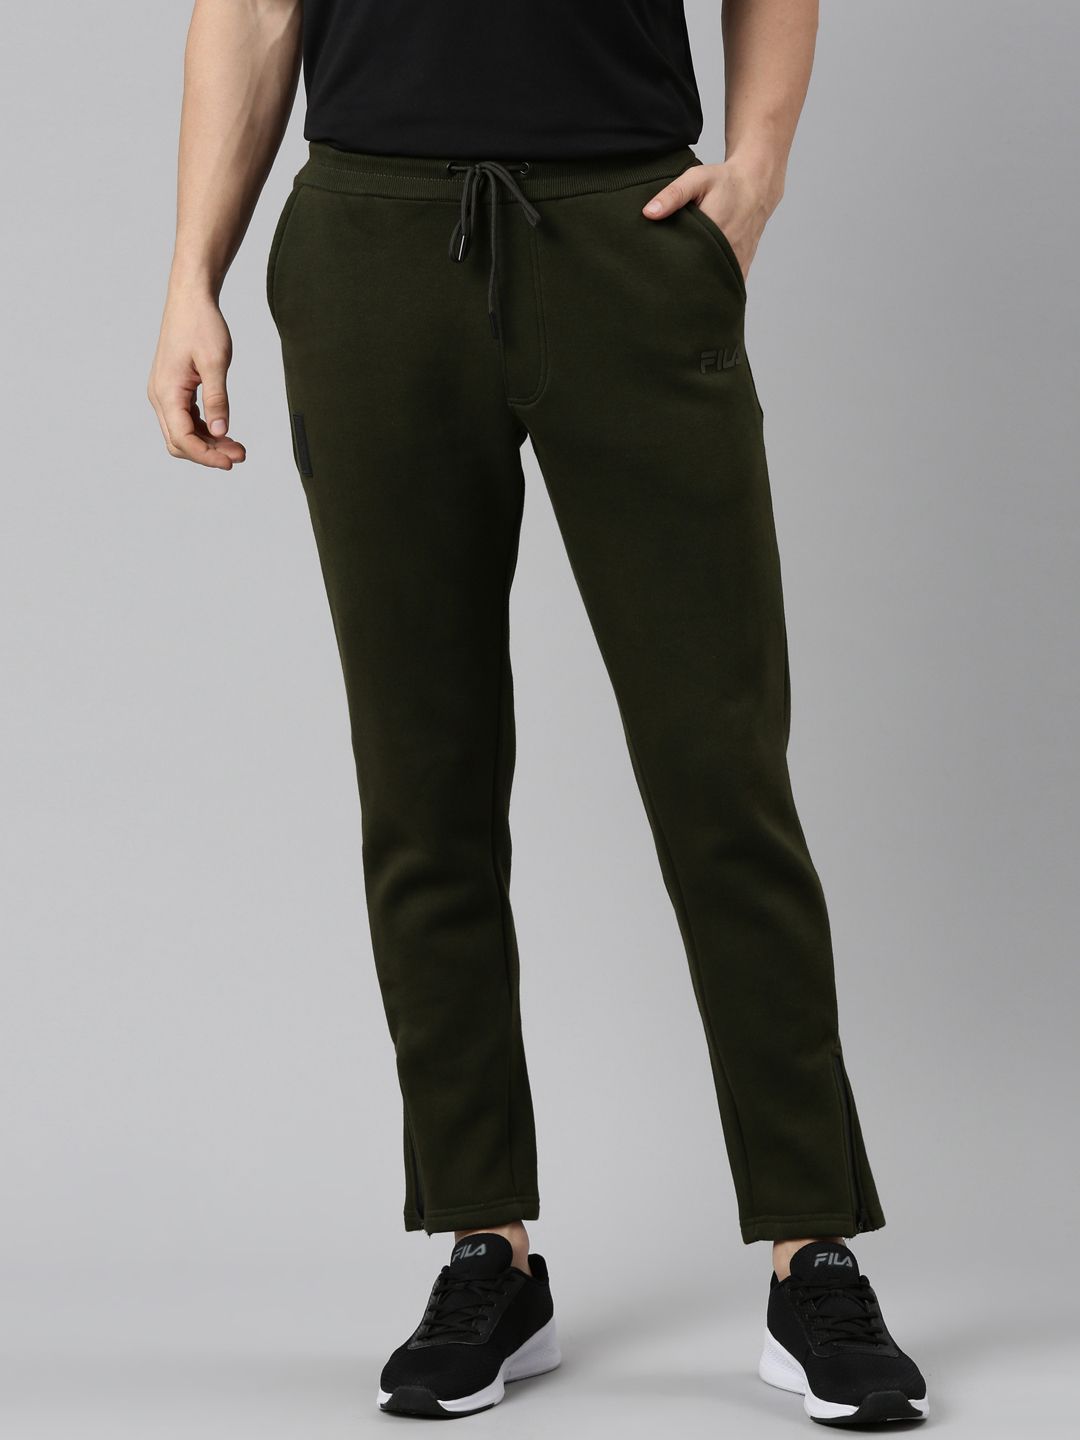 FILA UO Exclusive Iridescent Cargo Trousers | Urban Outfitters UK